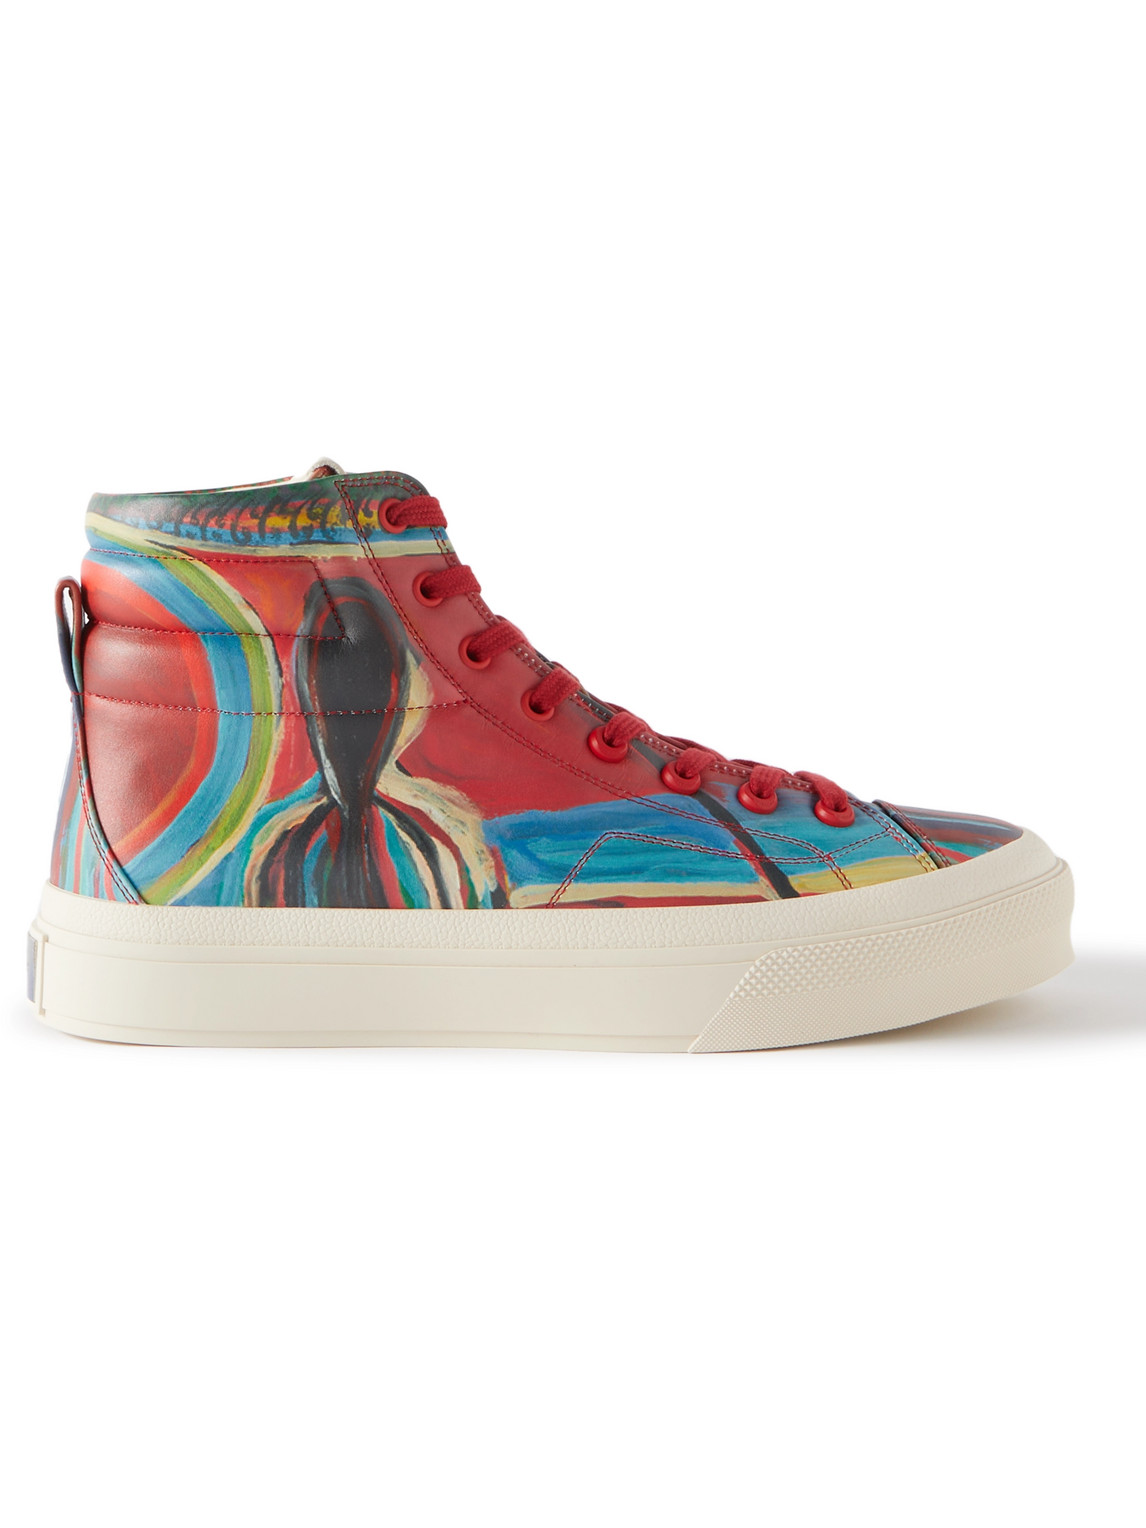 Givenchy Josh Smith Printed Leather High-Top Sneakers